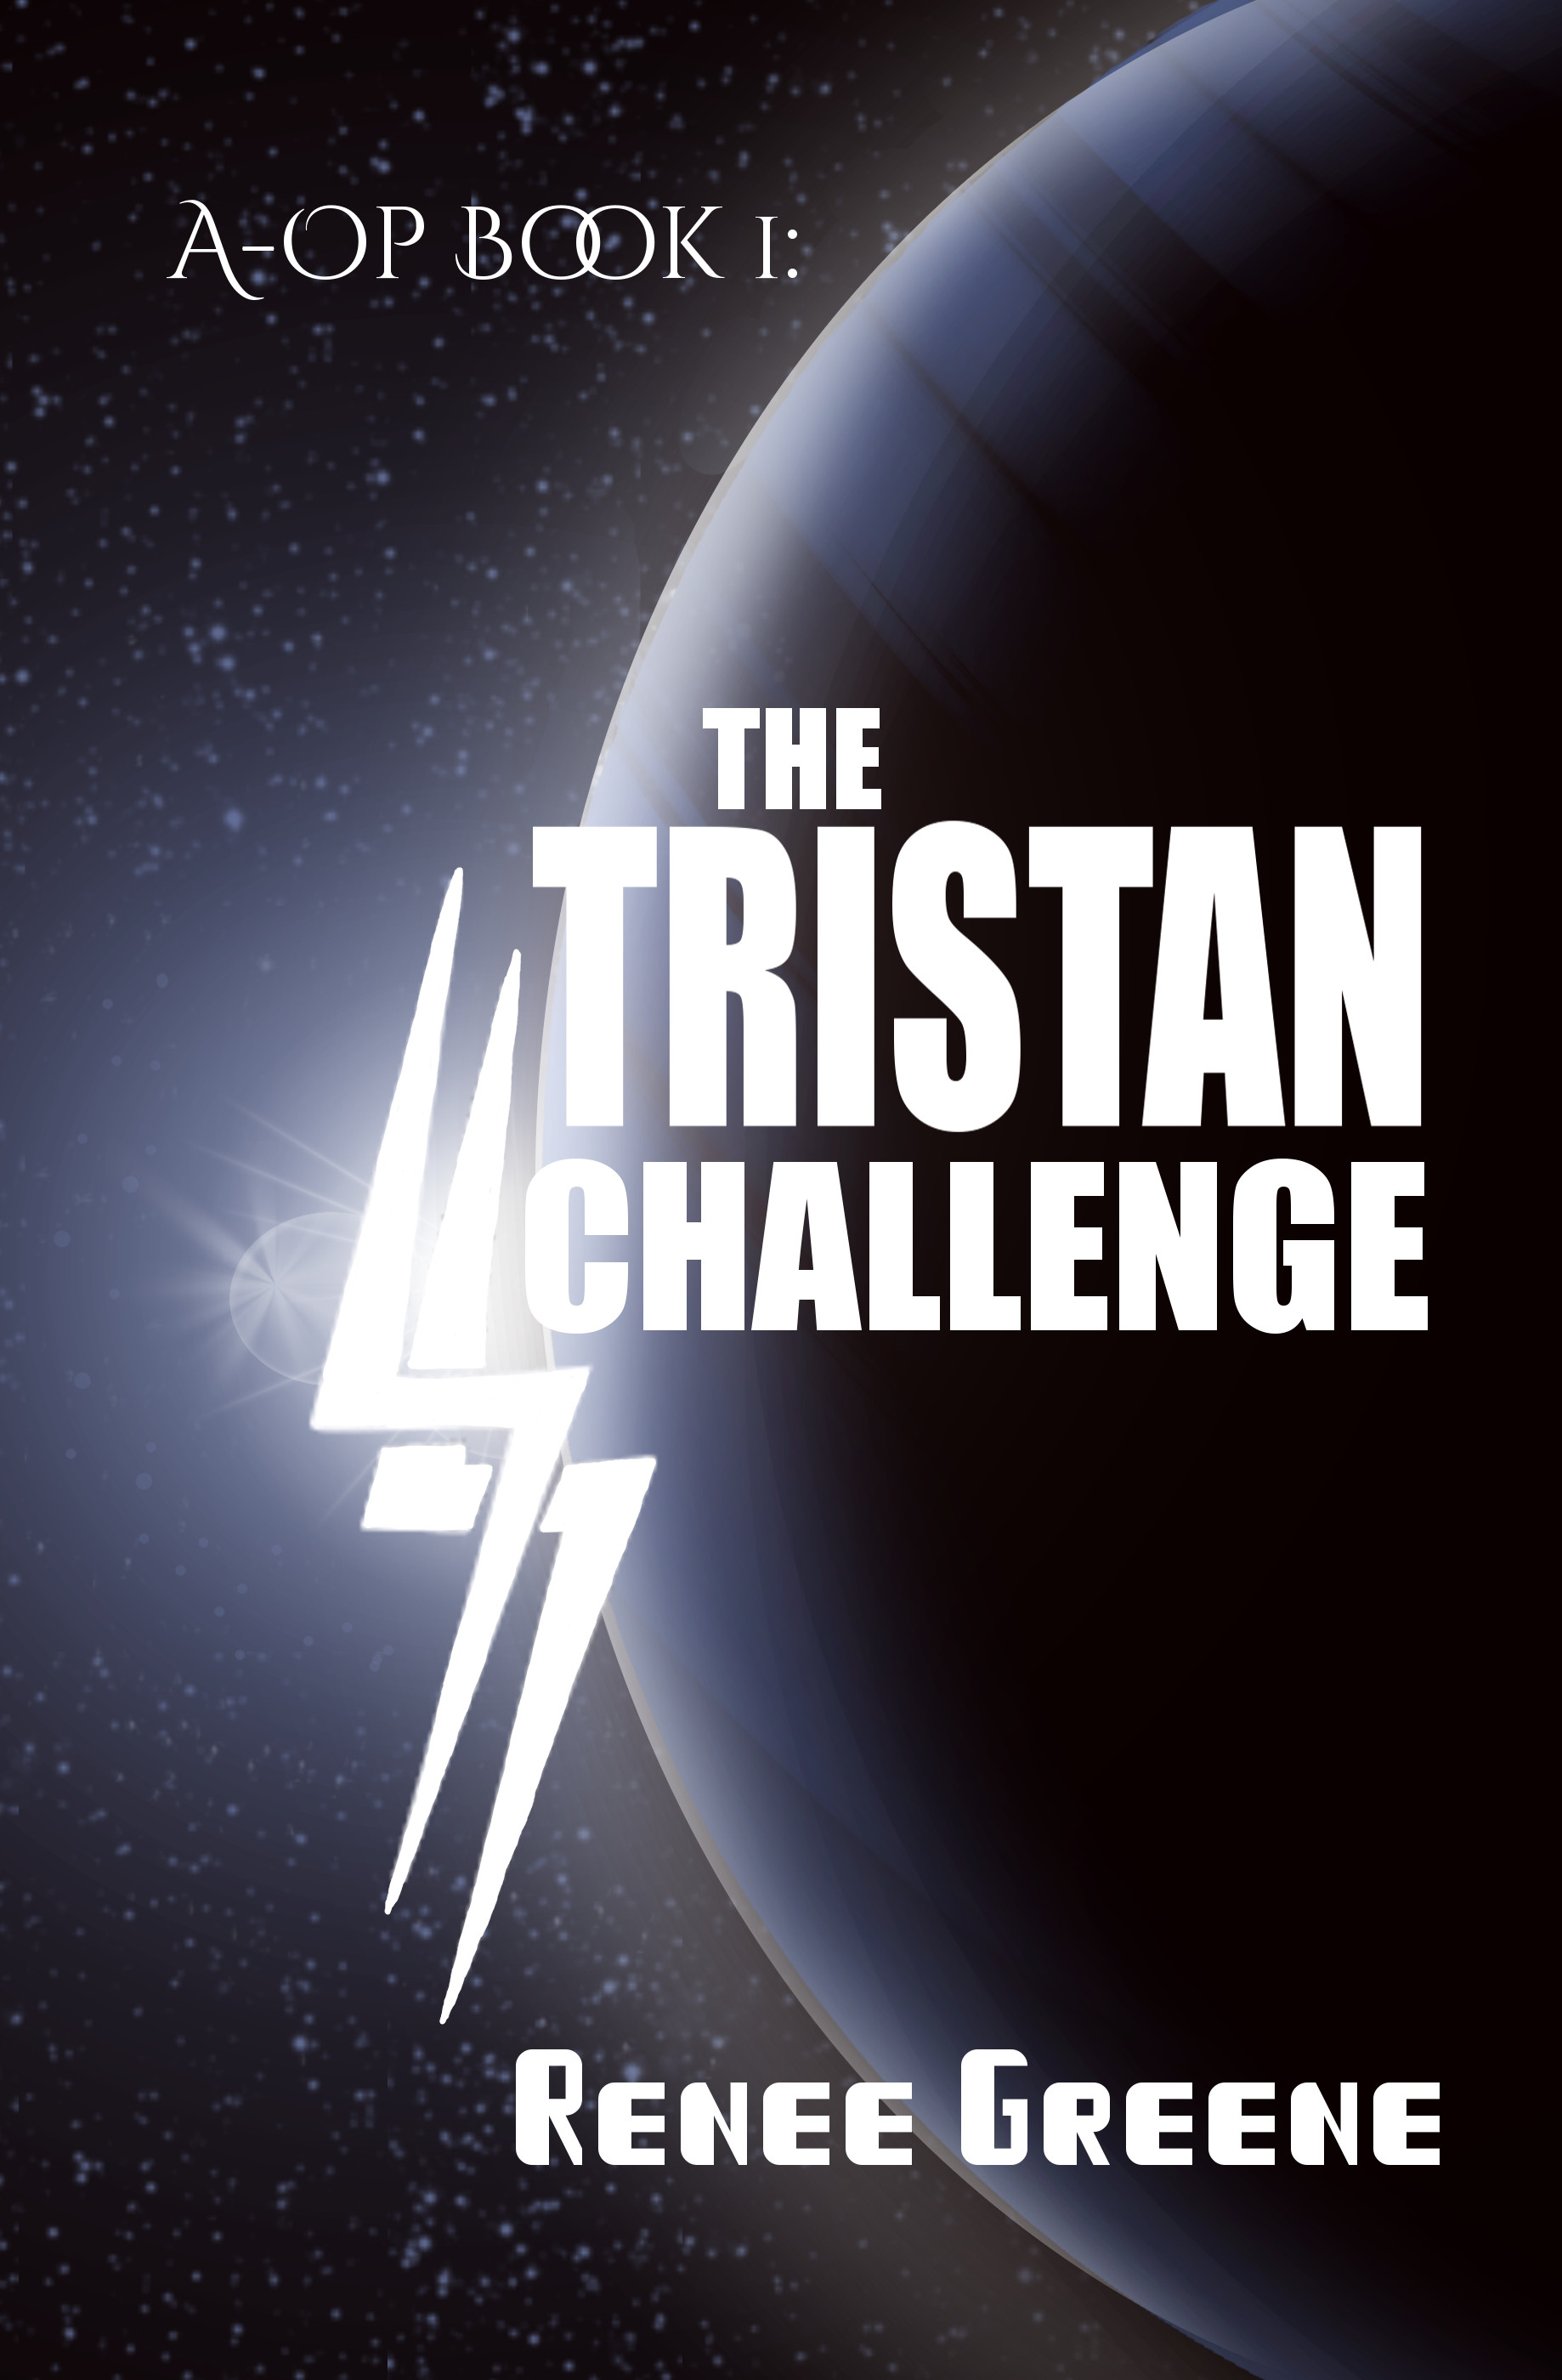 A-OP Book 1: The Tristan Challenge